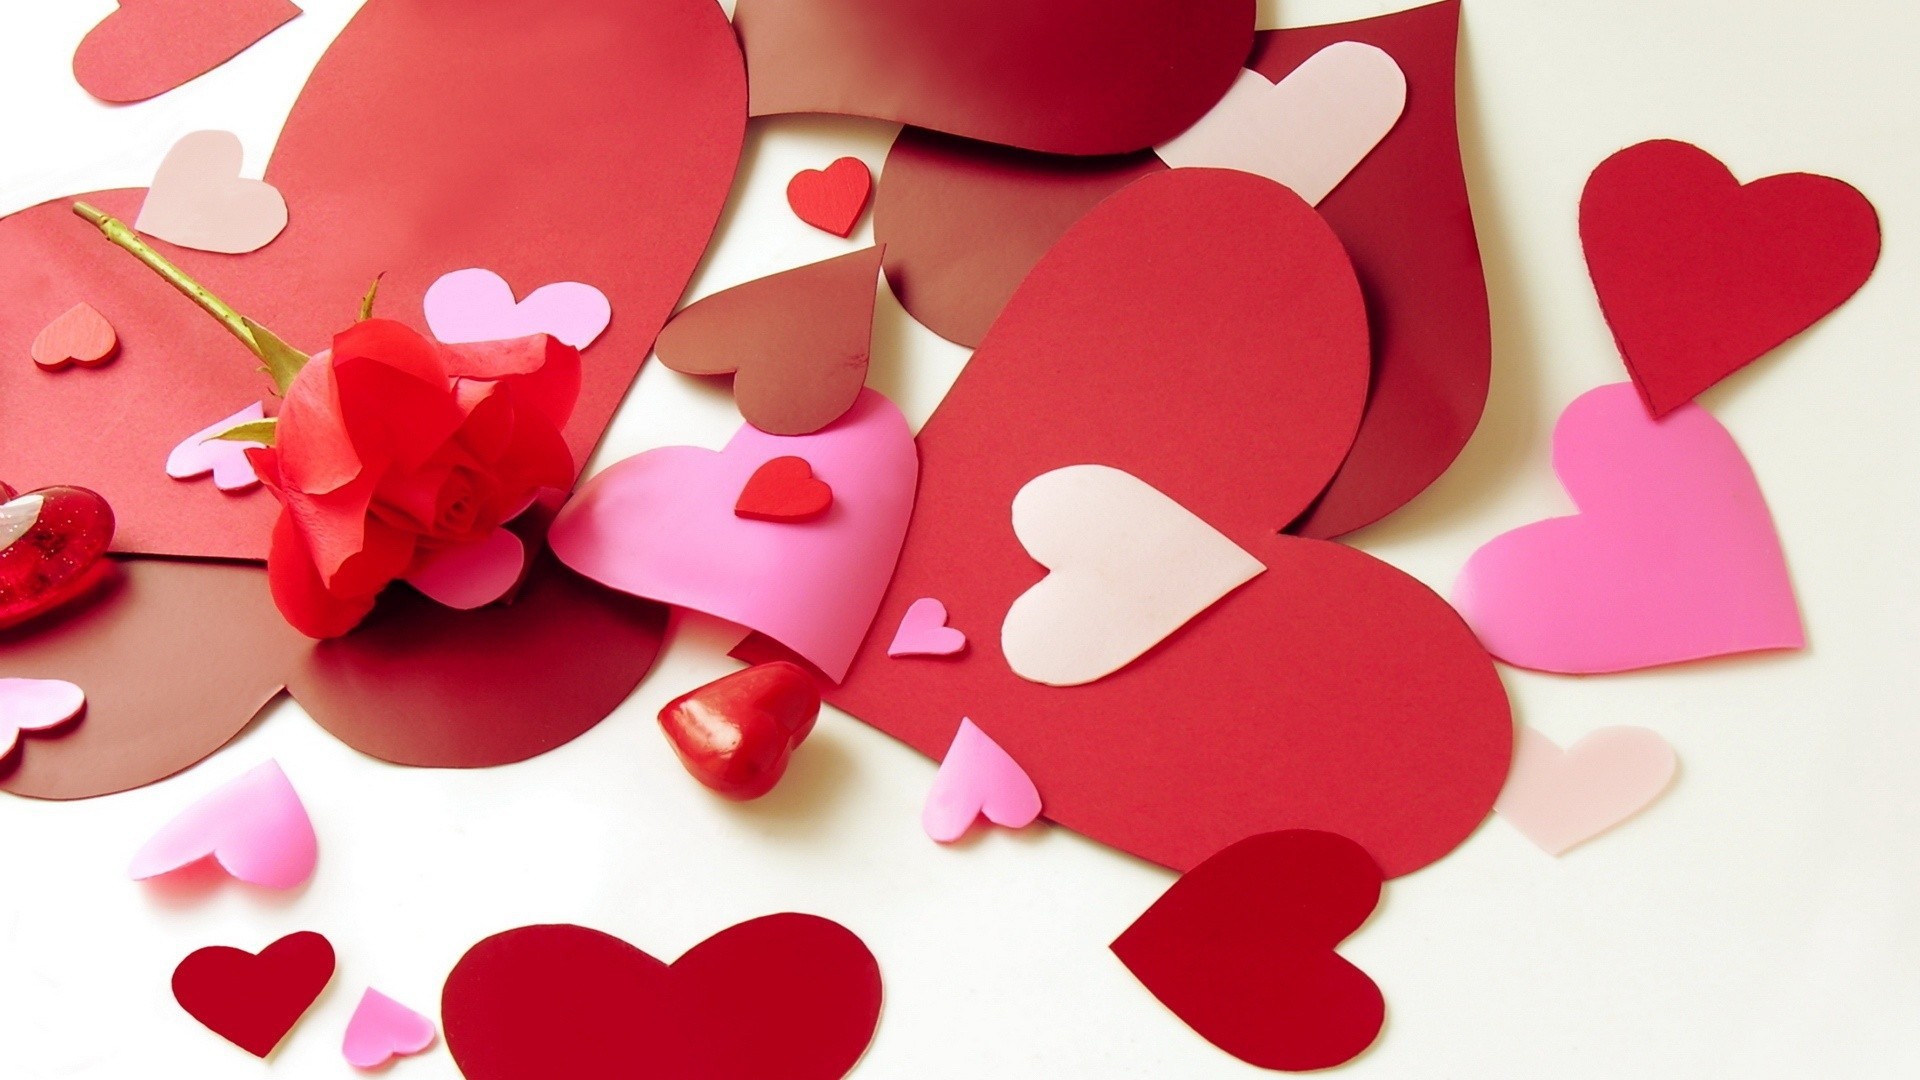 Paper hearts on Valentine's Day February 14 wallpapers and images ...